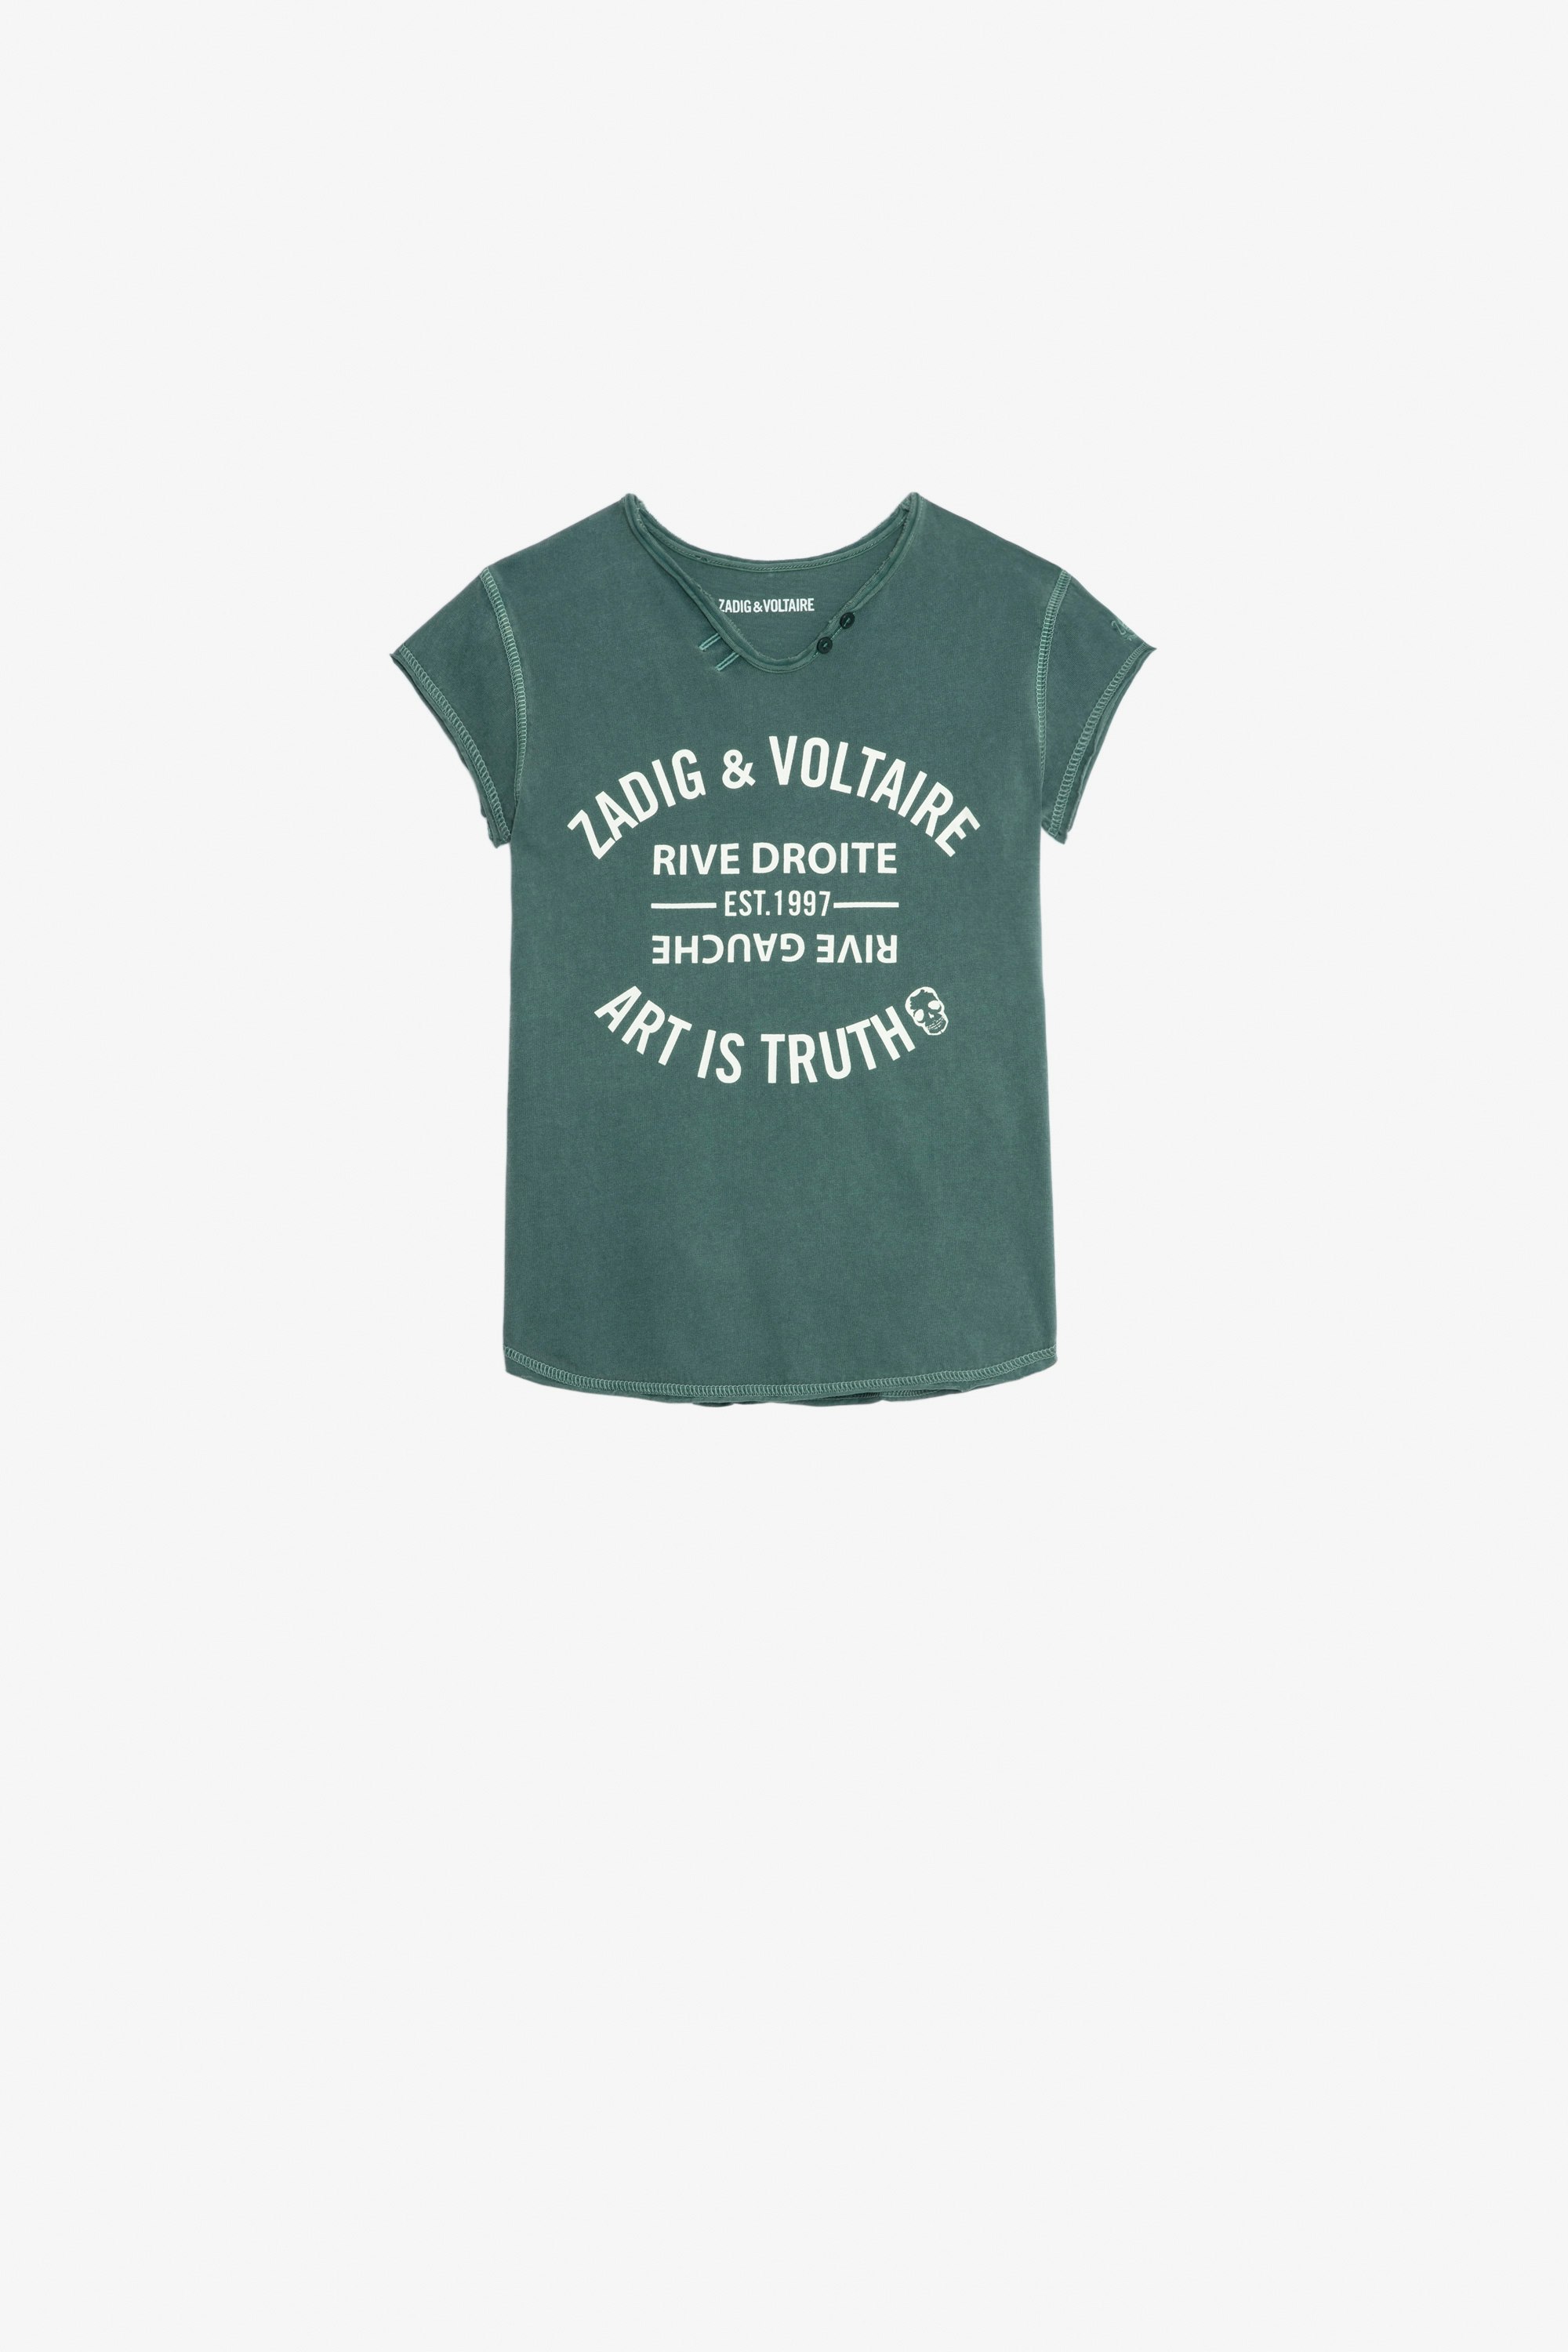 Boxo Girls’ T-Shirt Girls’ dark green short-sleeved cotton jersey T-shirt with insignia print and embroidery.